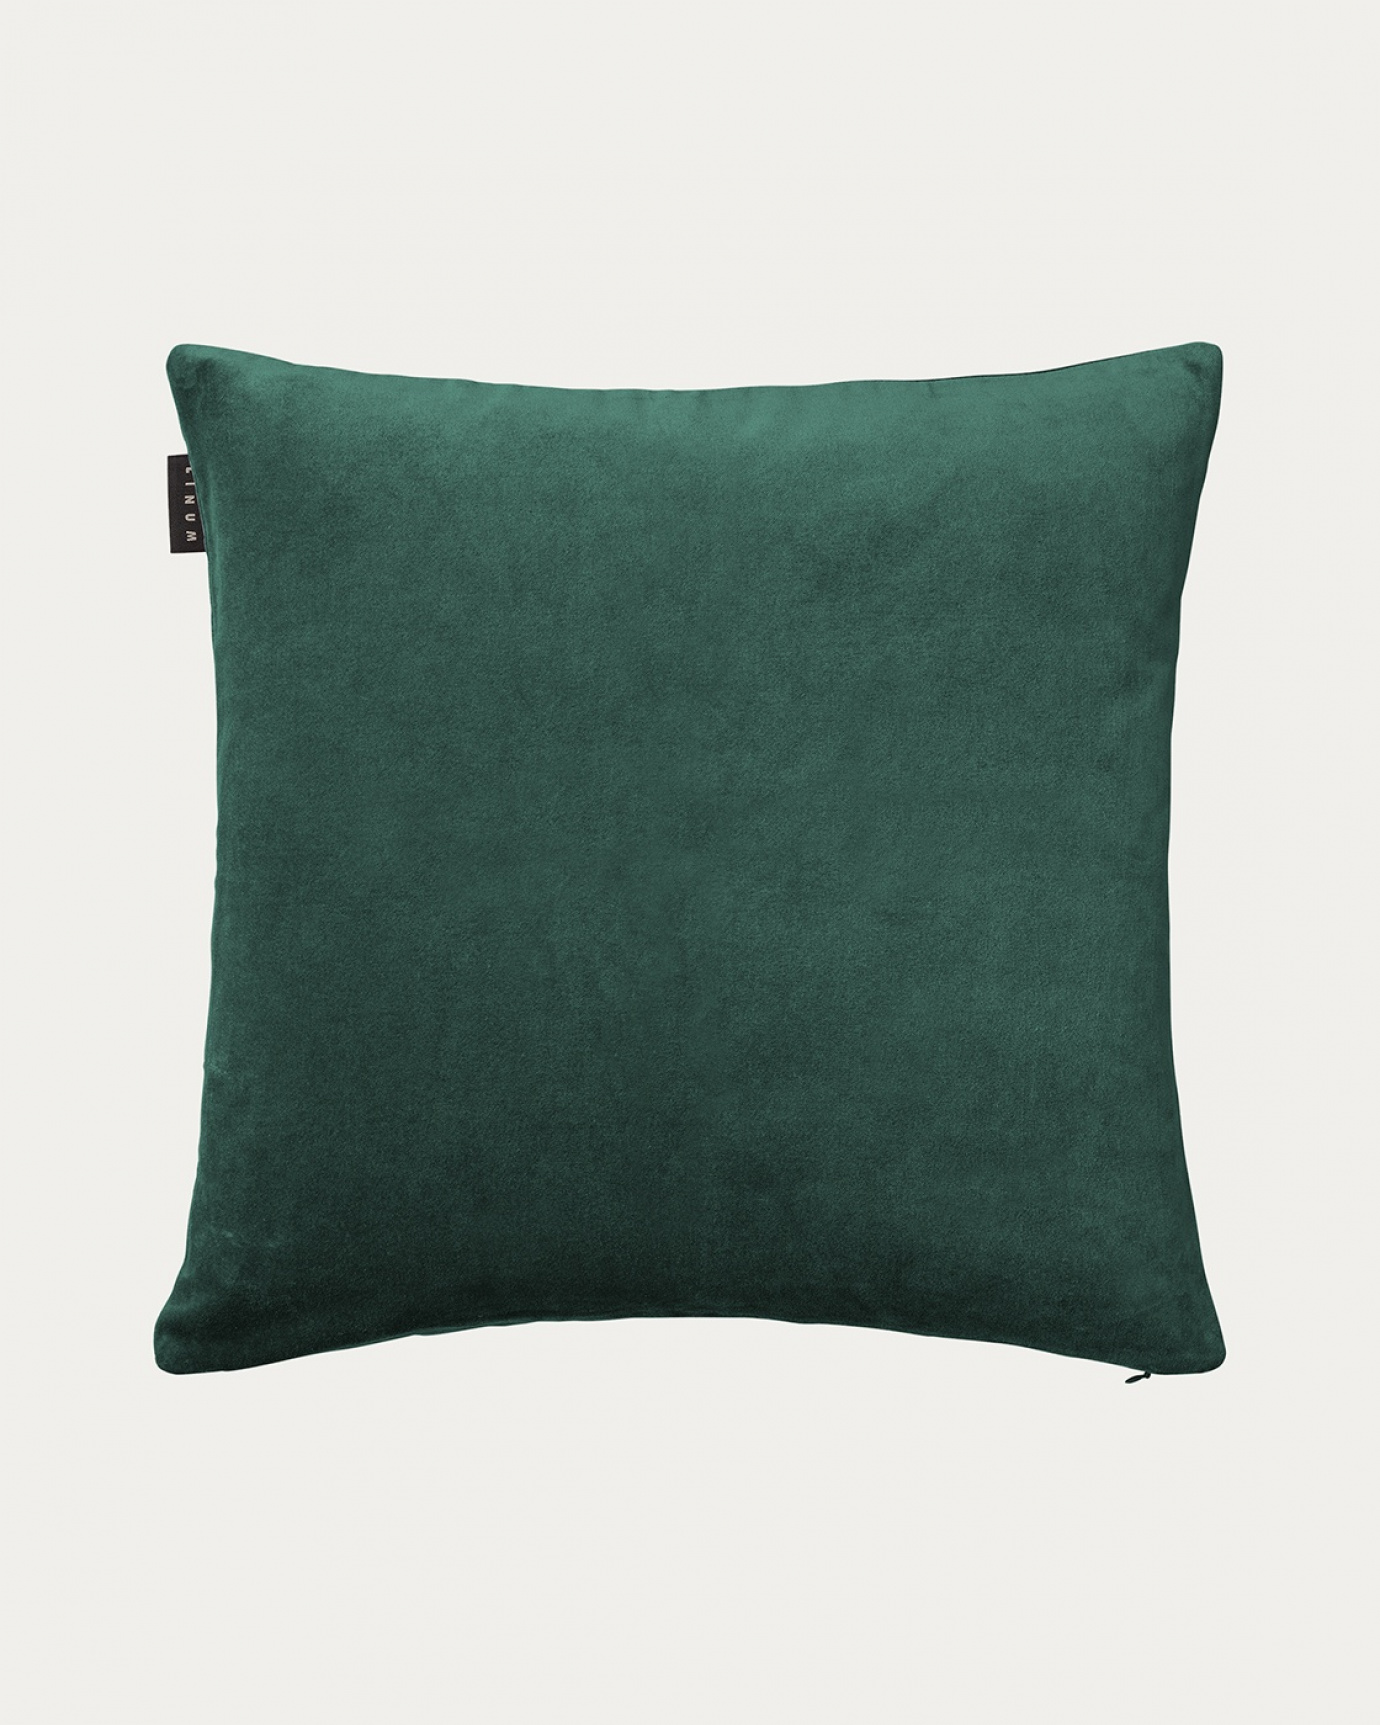 Product image deep emerald green PAOLO cushion cover in soft cotton velvet from LINUM DESIGN. Size 50x50 cm.